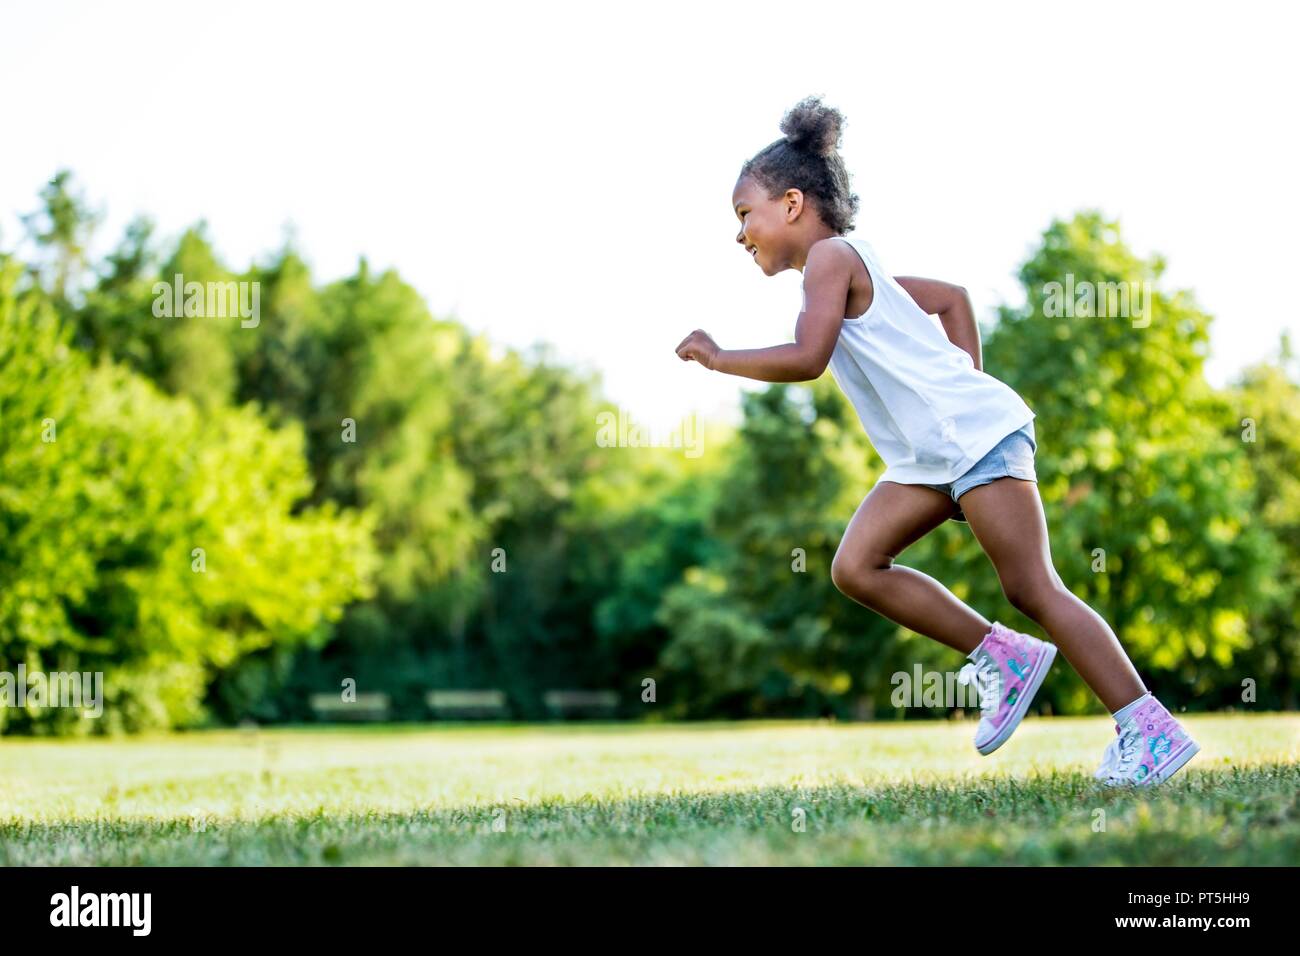 Little girl running in park, souriant. Banque D'Images